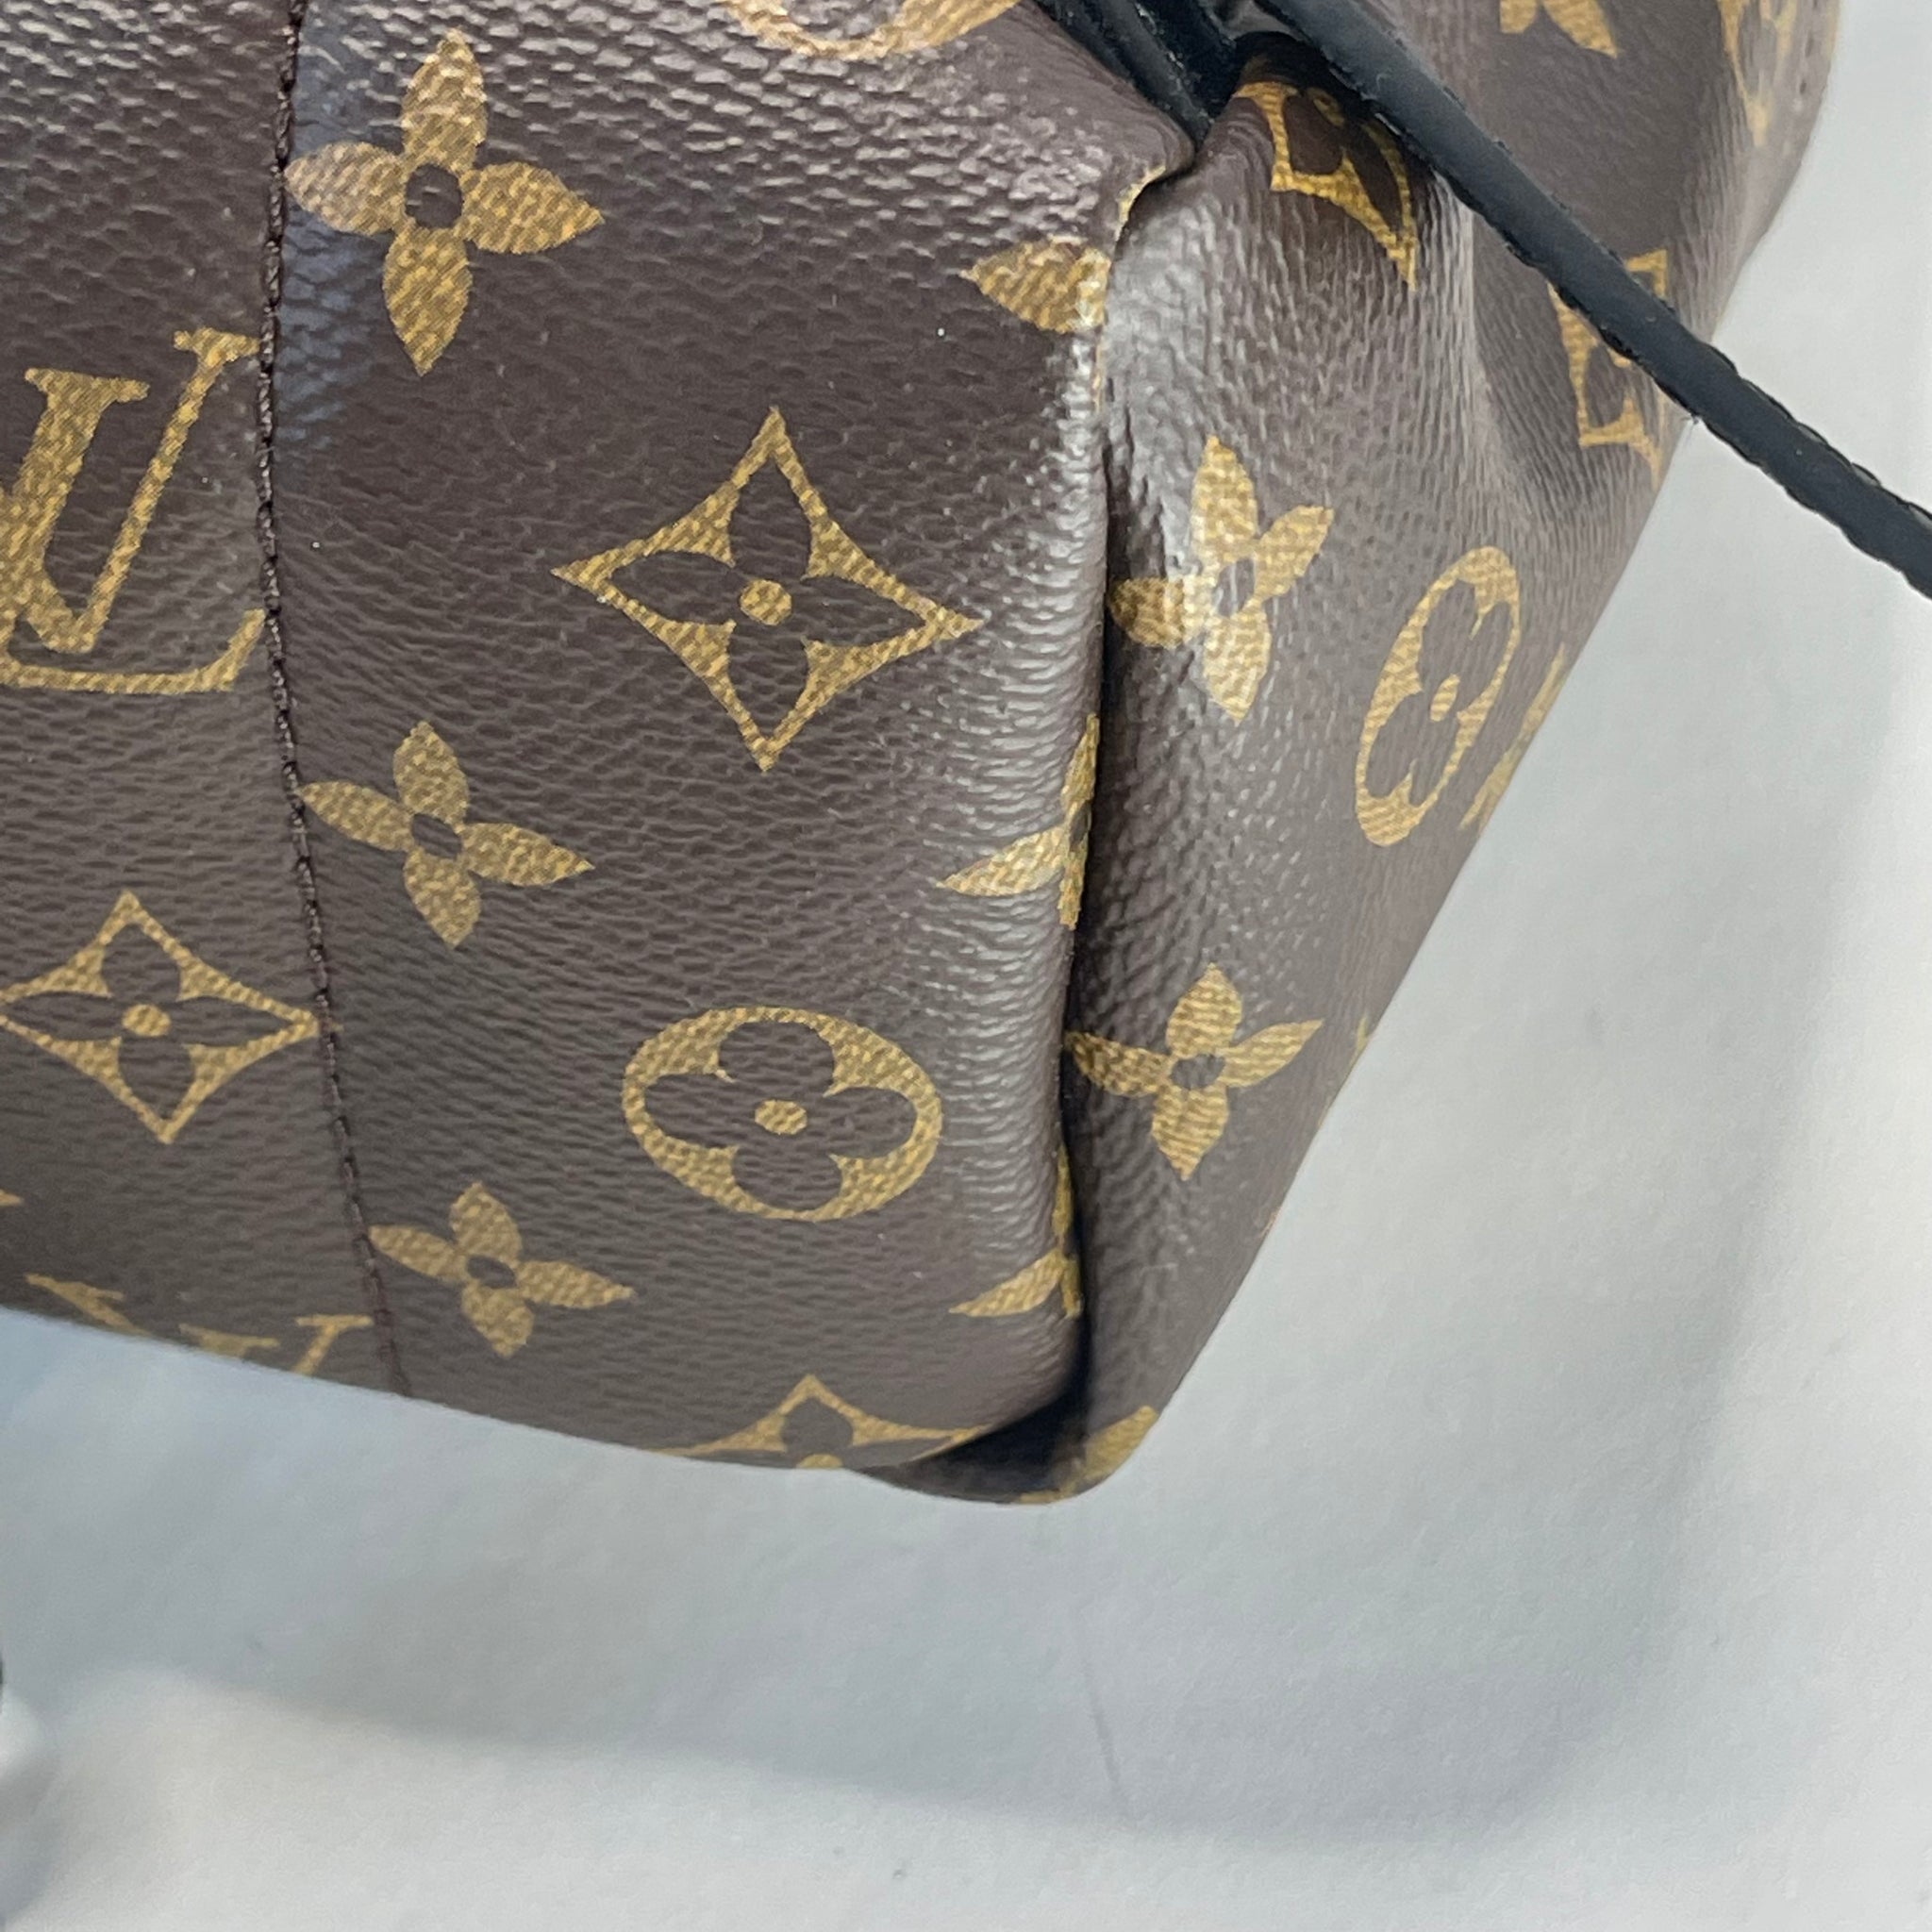 Lv Palm Springs Pm Review